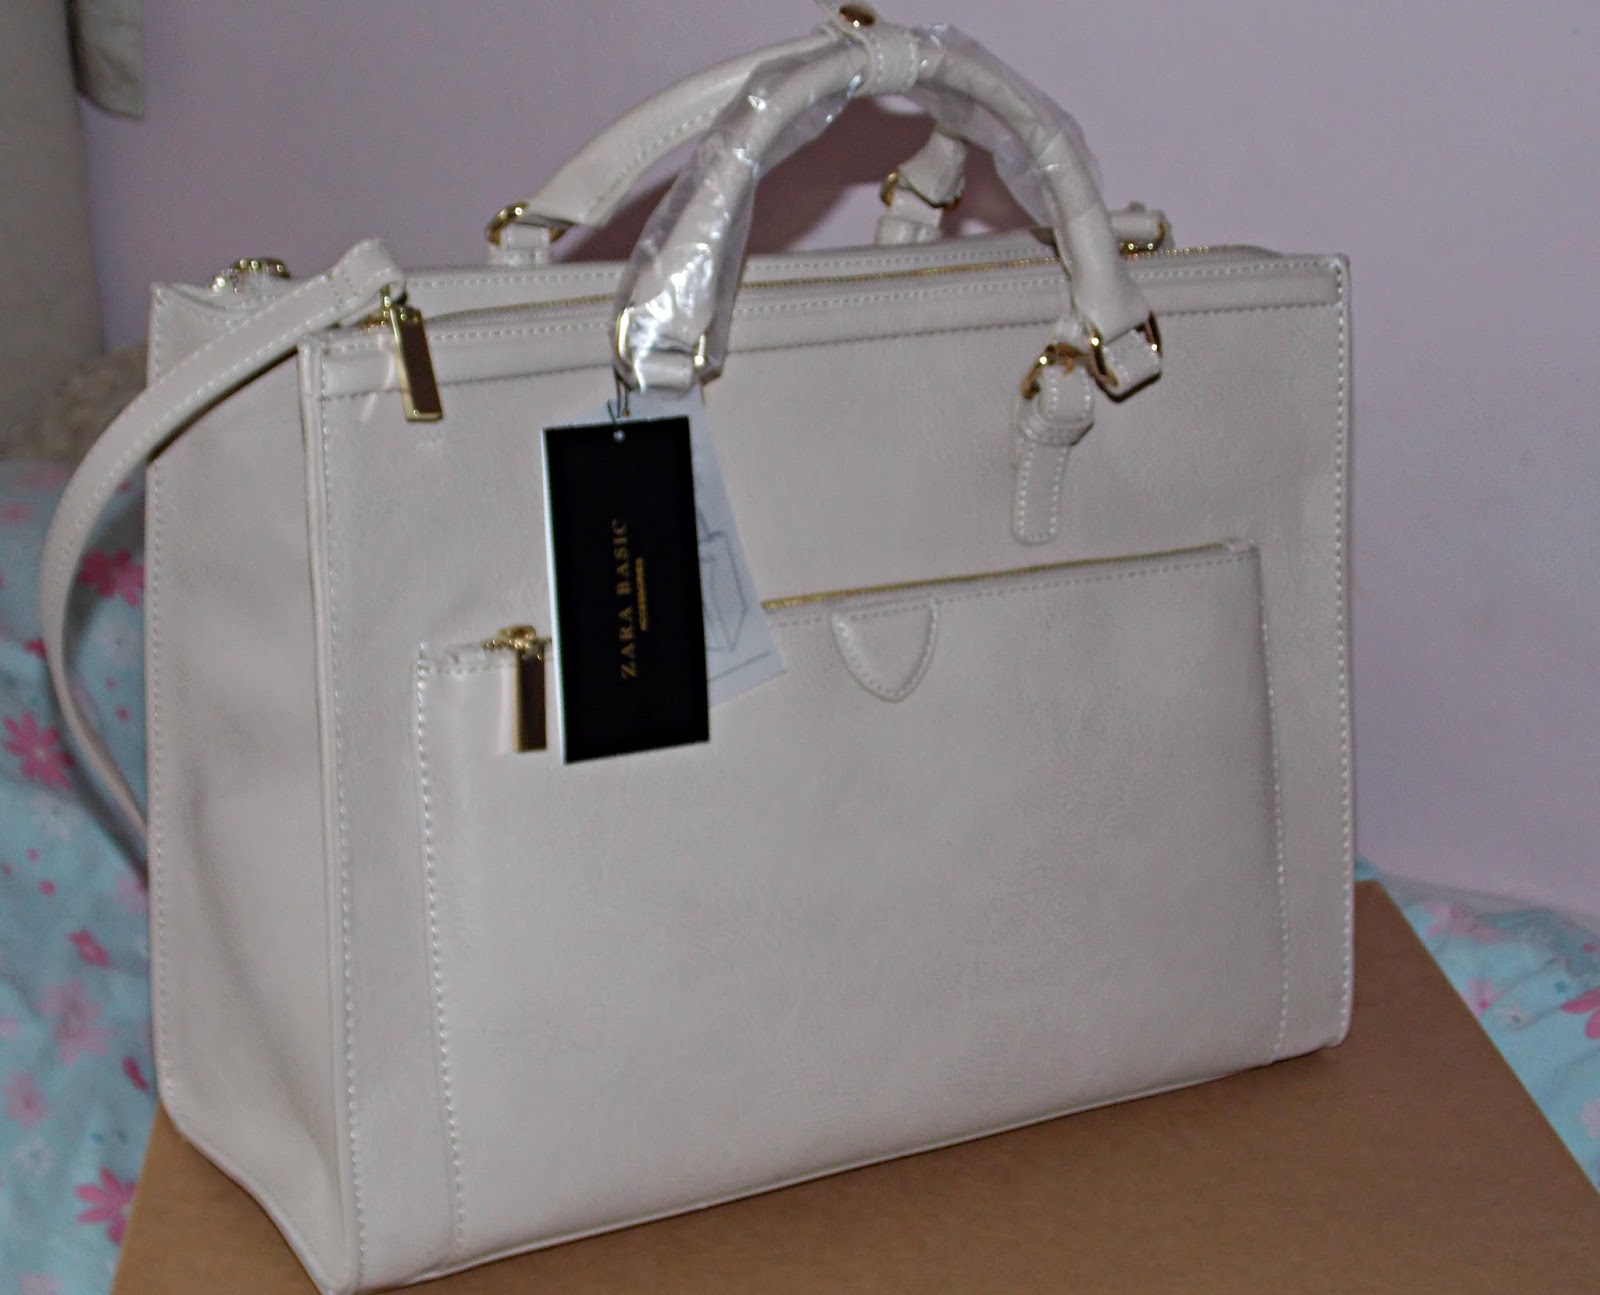 REVIEW: ZARA OFFICE CITYBAG WITH ZIPS